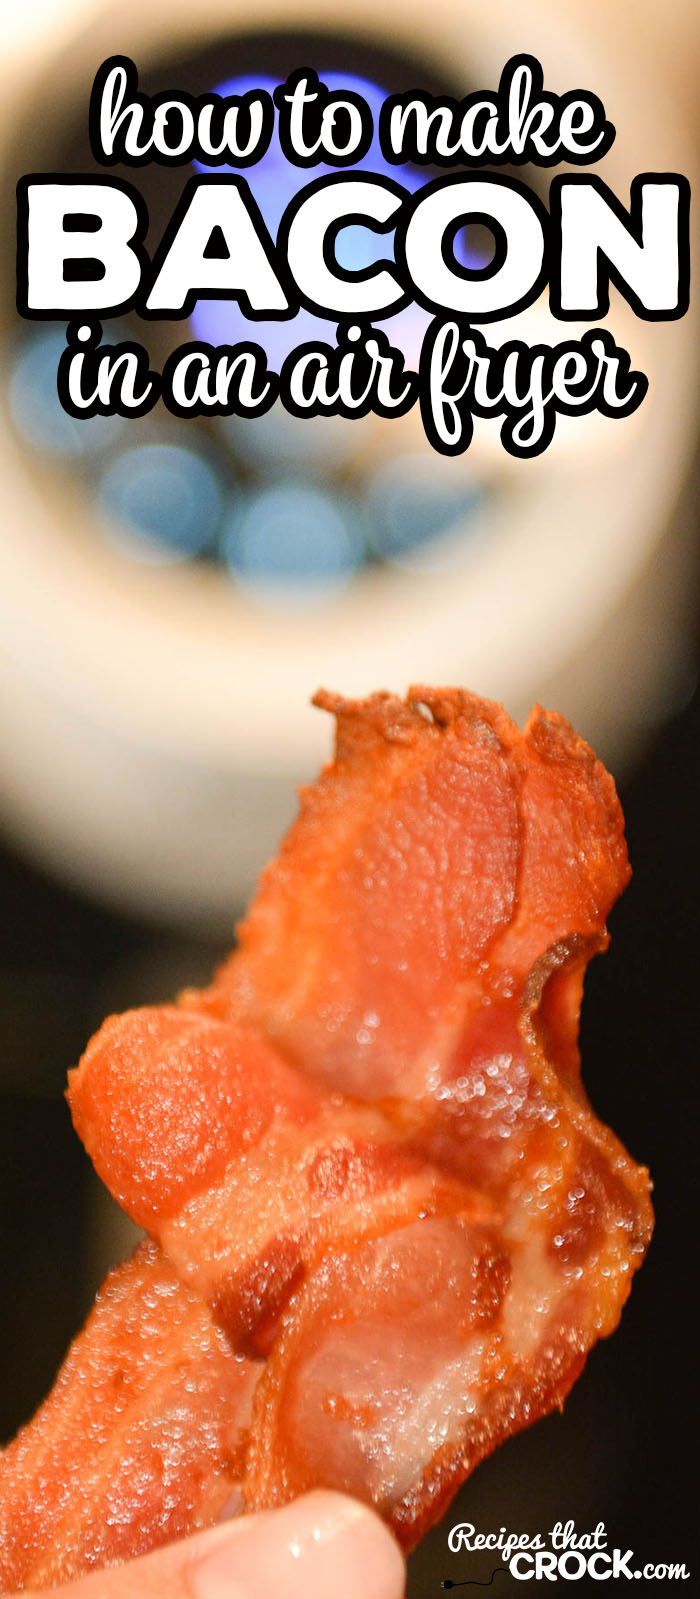 Are you wondering how to make bacon in an Air Fryer? We use a lot of bacon in our low carb recipes and our favorite way to quickly make crispy bacon is in the air fryer.